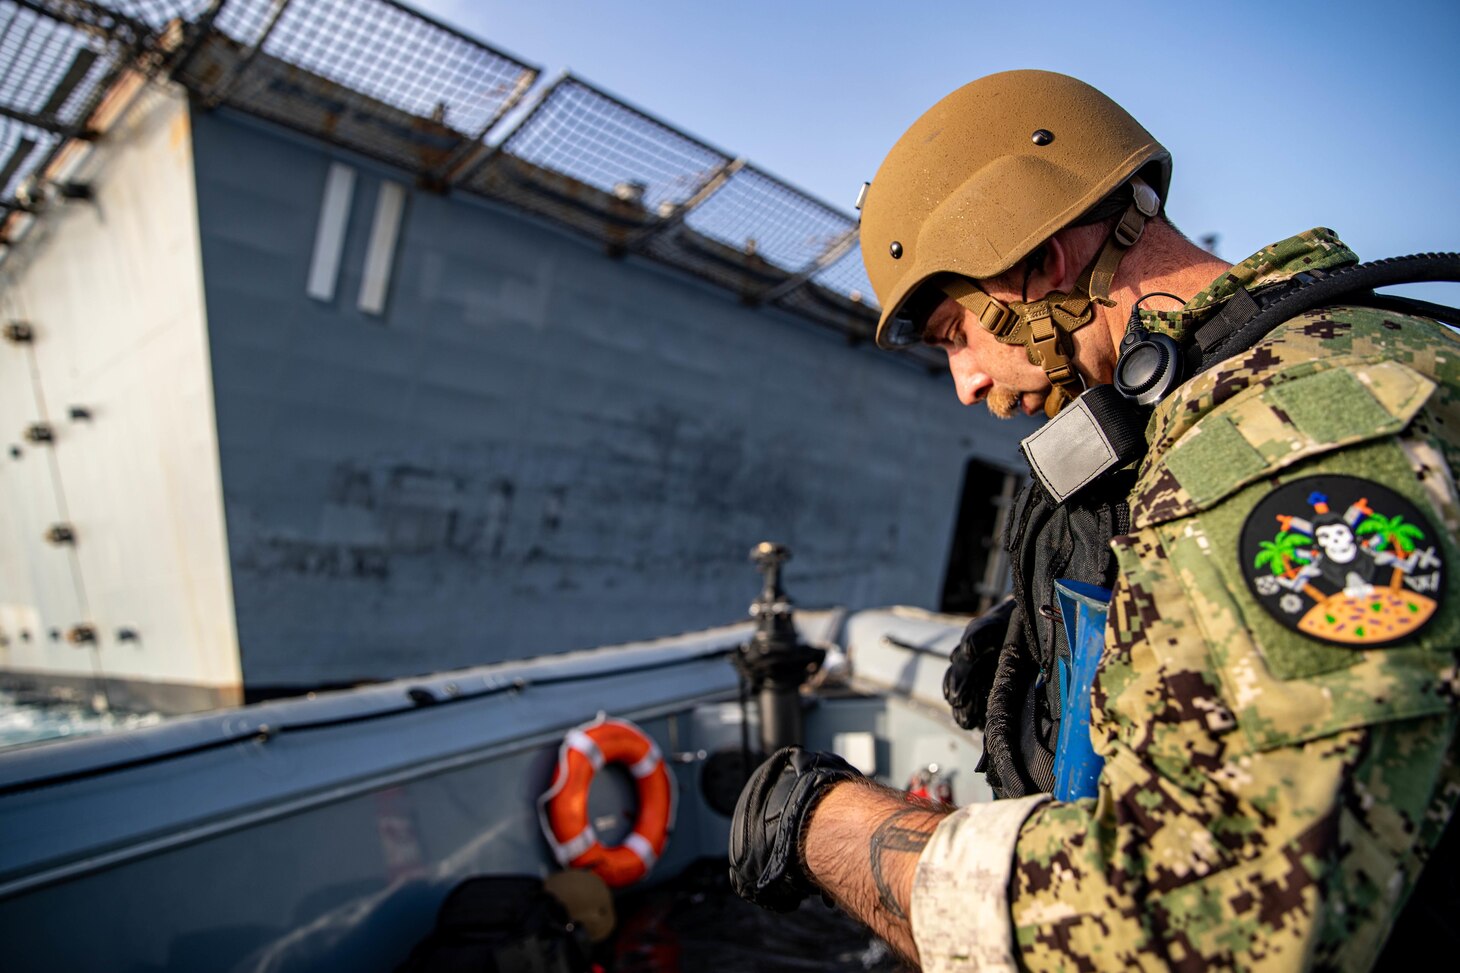 GULF OF ADEN (June 7, 2022) Gunner’s Mate 2nd Class Brandon Reznak participates in visit board search and seizure (VBSS) training on a rigid-hull inflatable boat attached to littoral combat ship USS Sioux City (LCS 11), in the Gulf of Aden June 7. Sioux City is deployed to the U.S. 5th Fleet area of operations to help ensure maritime security and stability in the Middle East region. (U.S. Navy photo by Mass Communication Specialist 3rd Class Nicholas A. Russell)